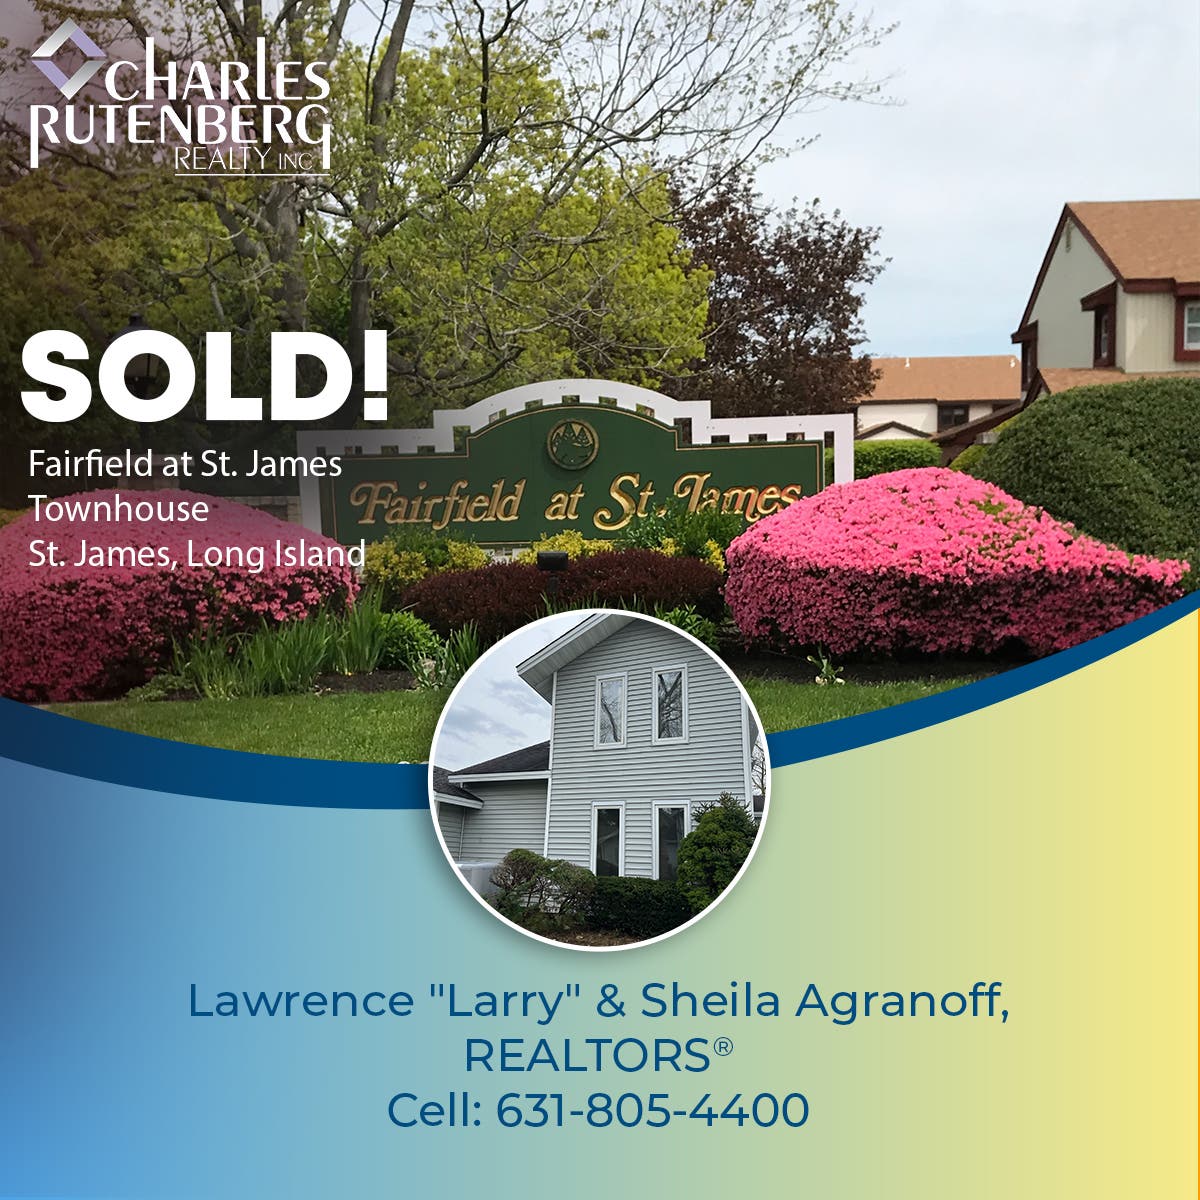 Fairfield At St James Townhouse Sold!